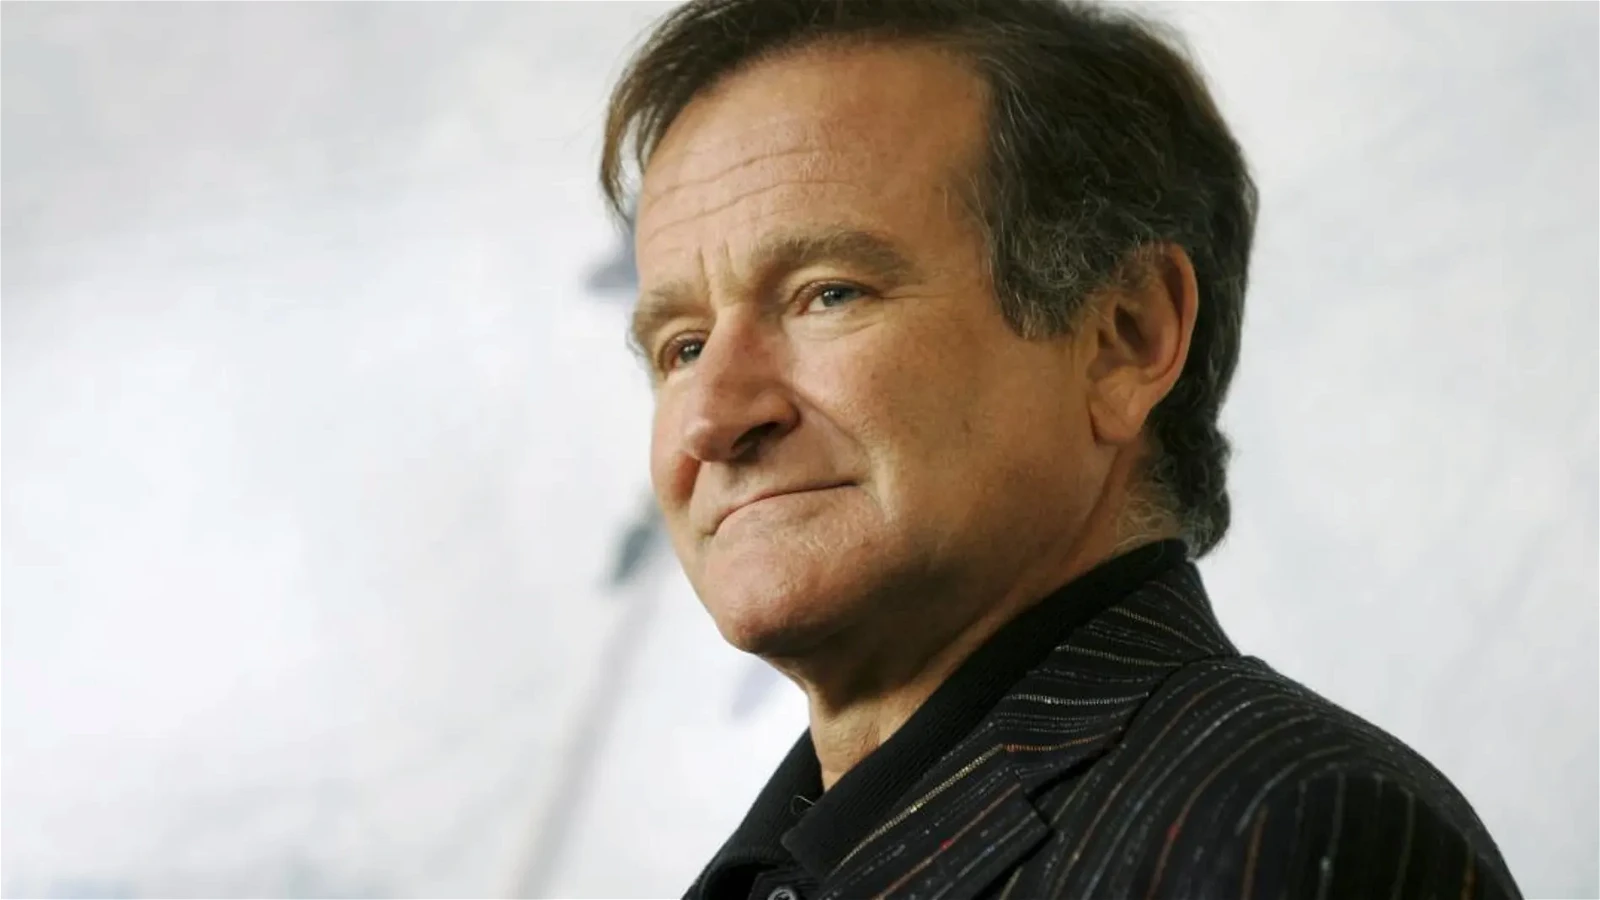 Late actor Robin Williams